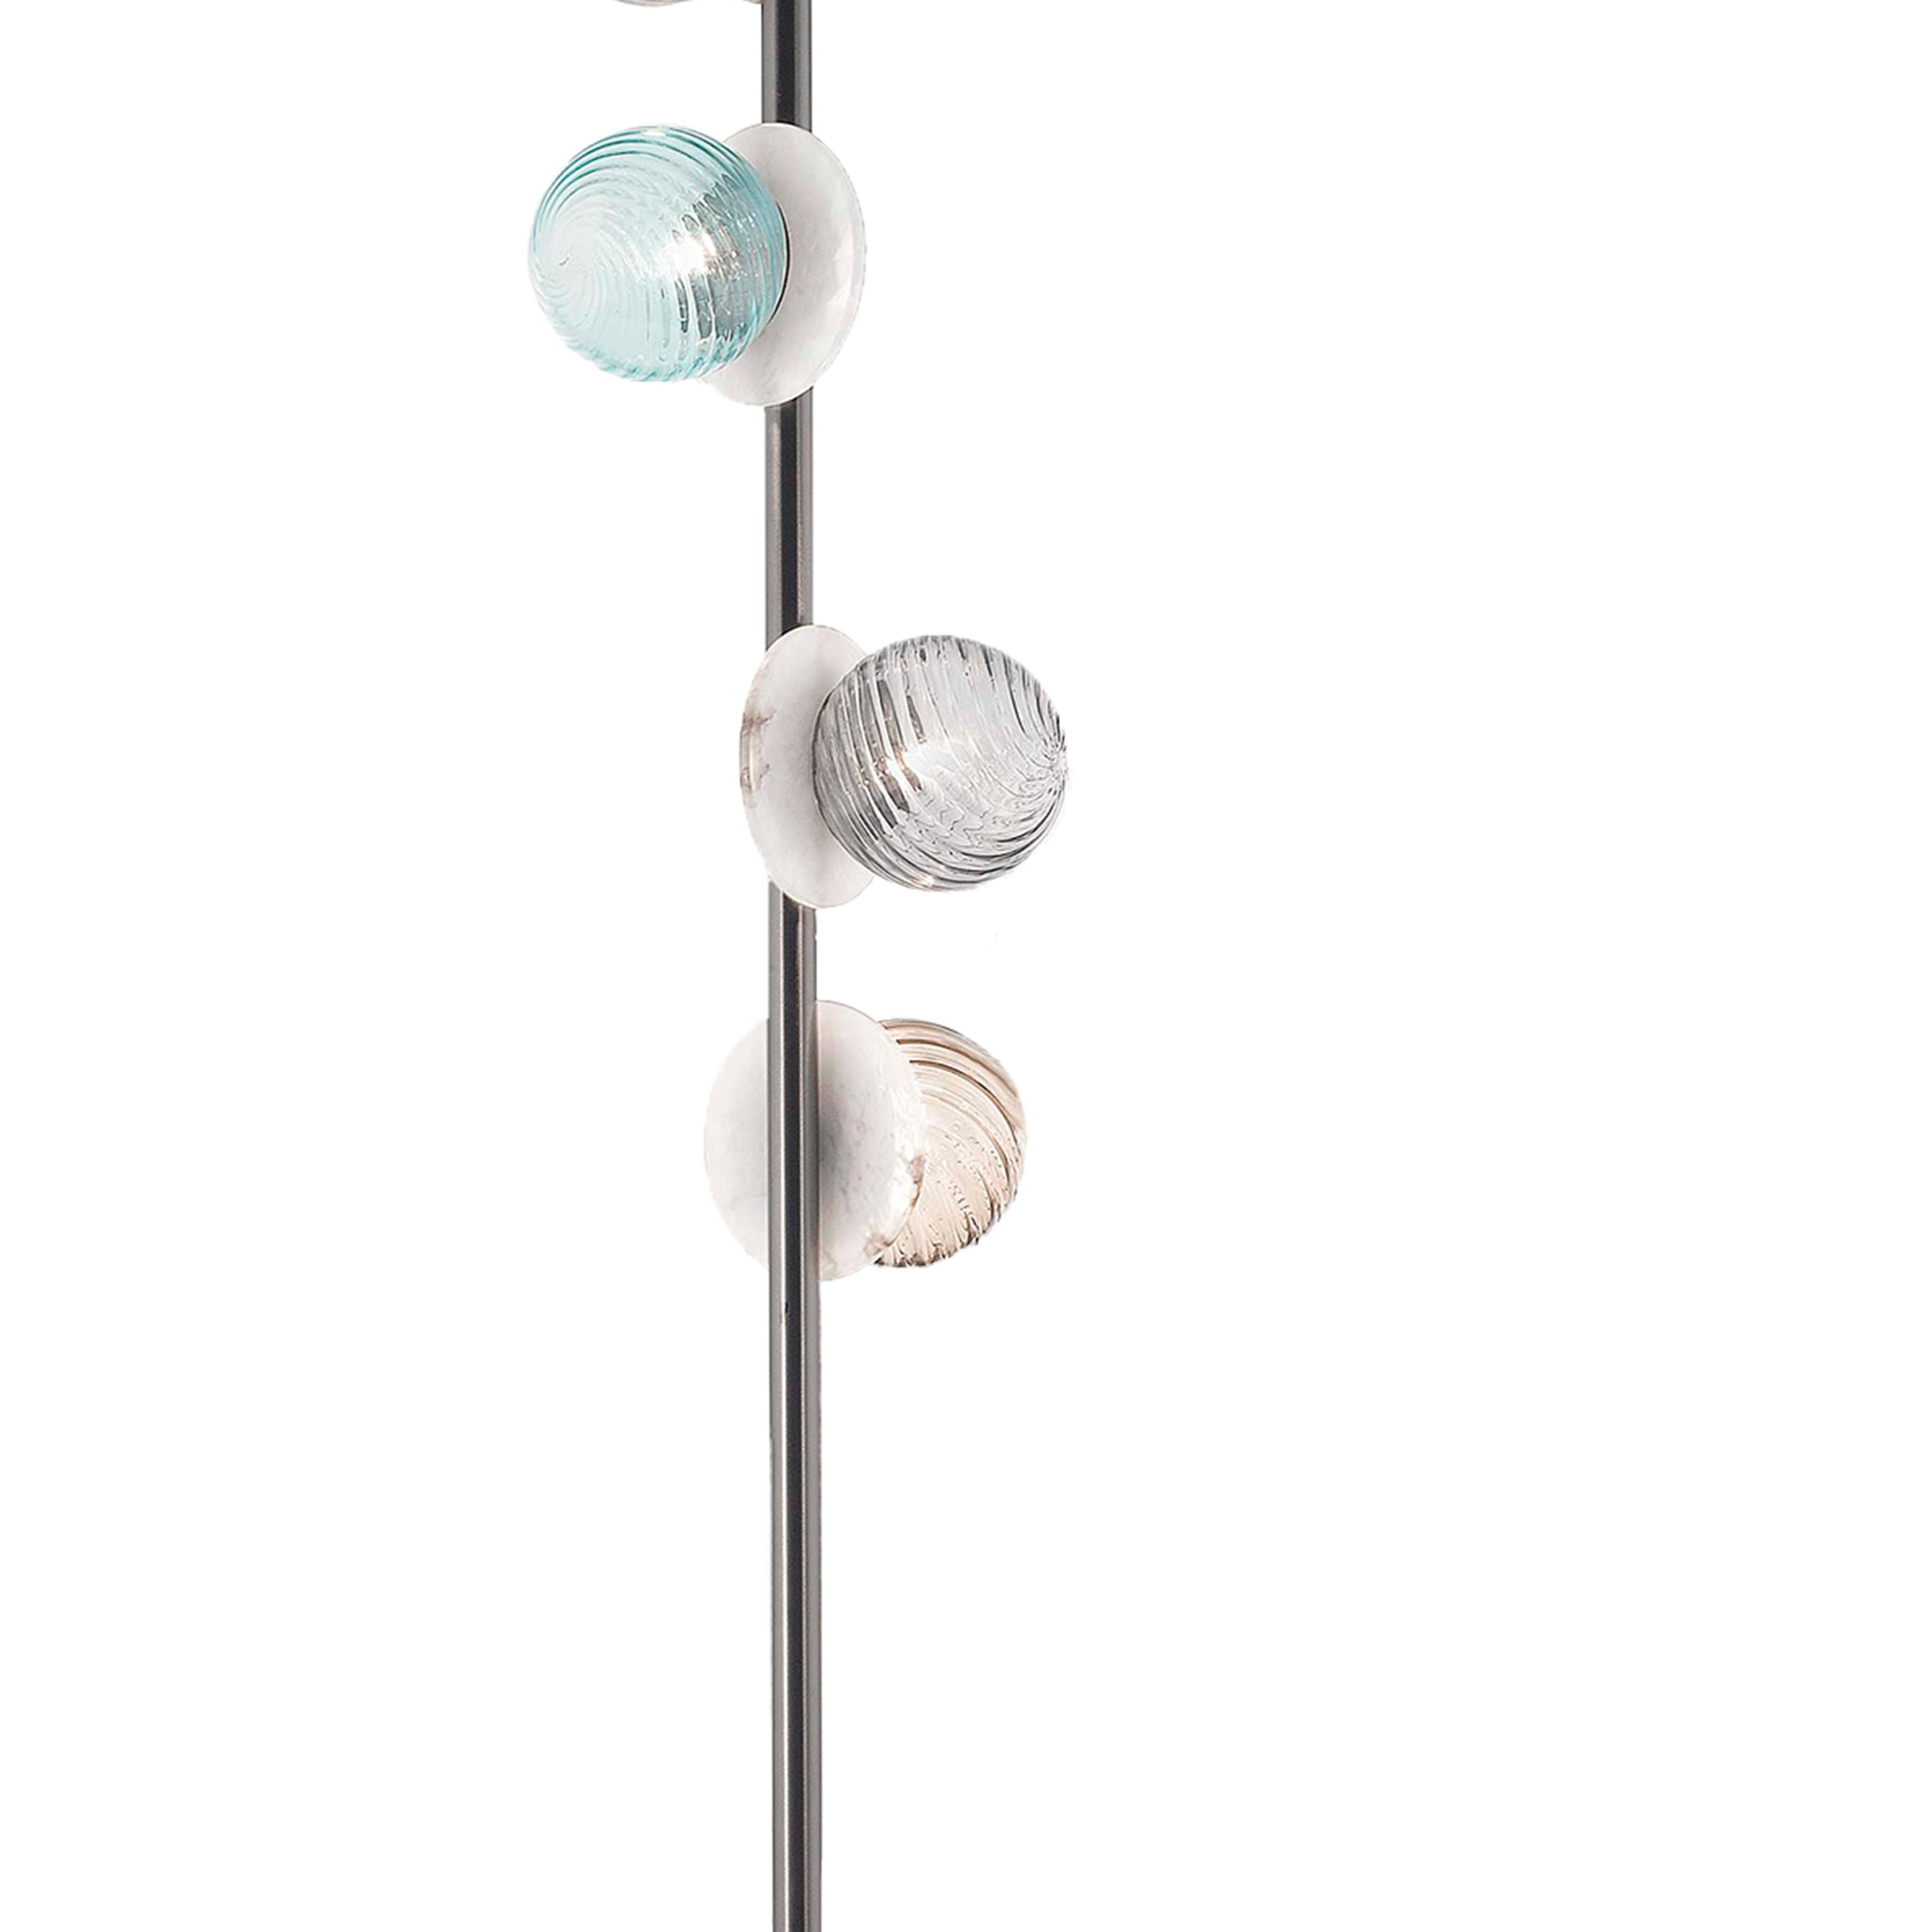 Afrodite table lamp by Alabastro Italiano
Dimensions: D 40 x H 170 cm
Materials: Italian white Alabaster, Italian iron, shiny silver, Fumè murano glass 
Other finishes available.
Light Source 1 x G9 LED 4 Watt, Tot. 420 Lumen, 3000 k, 220